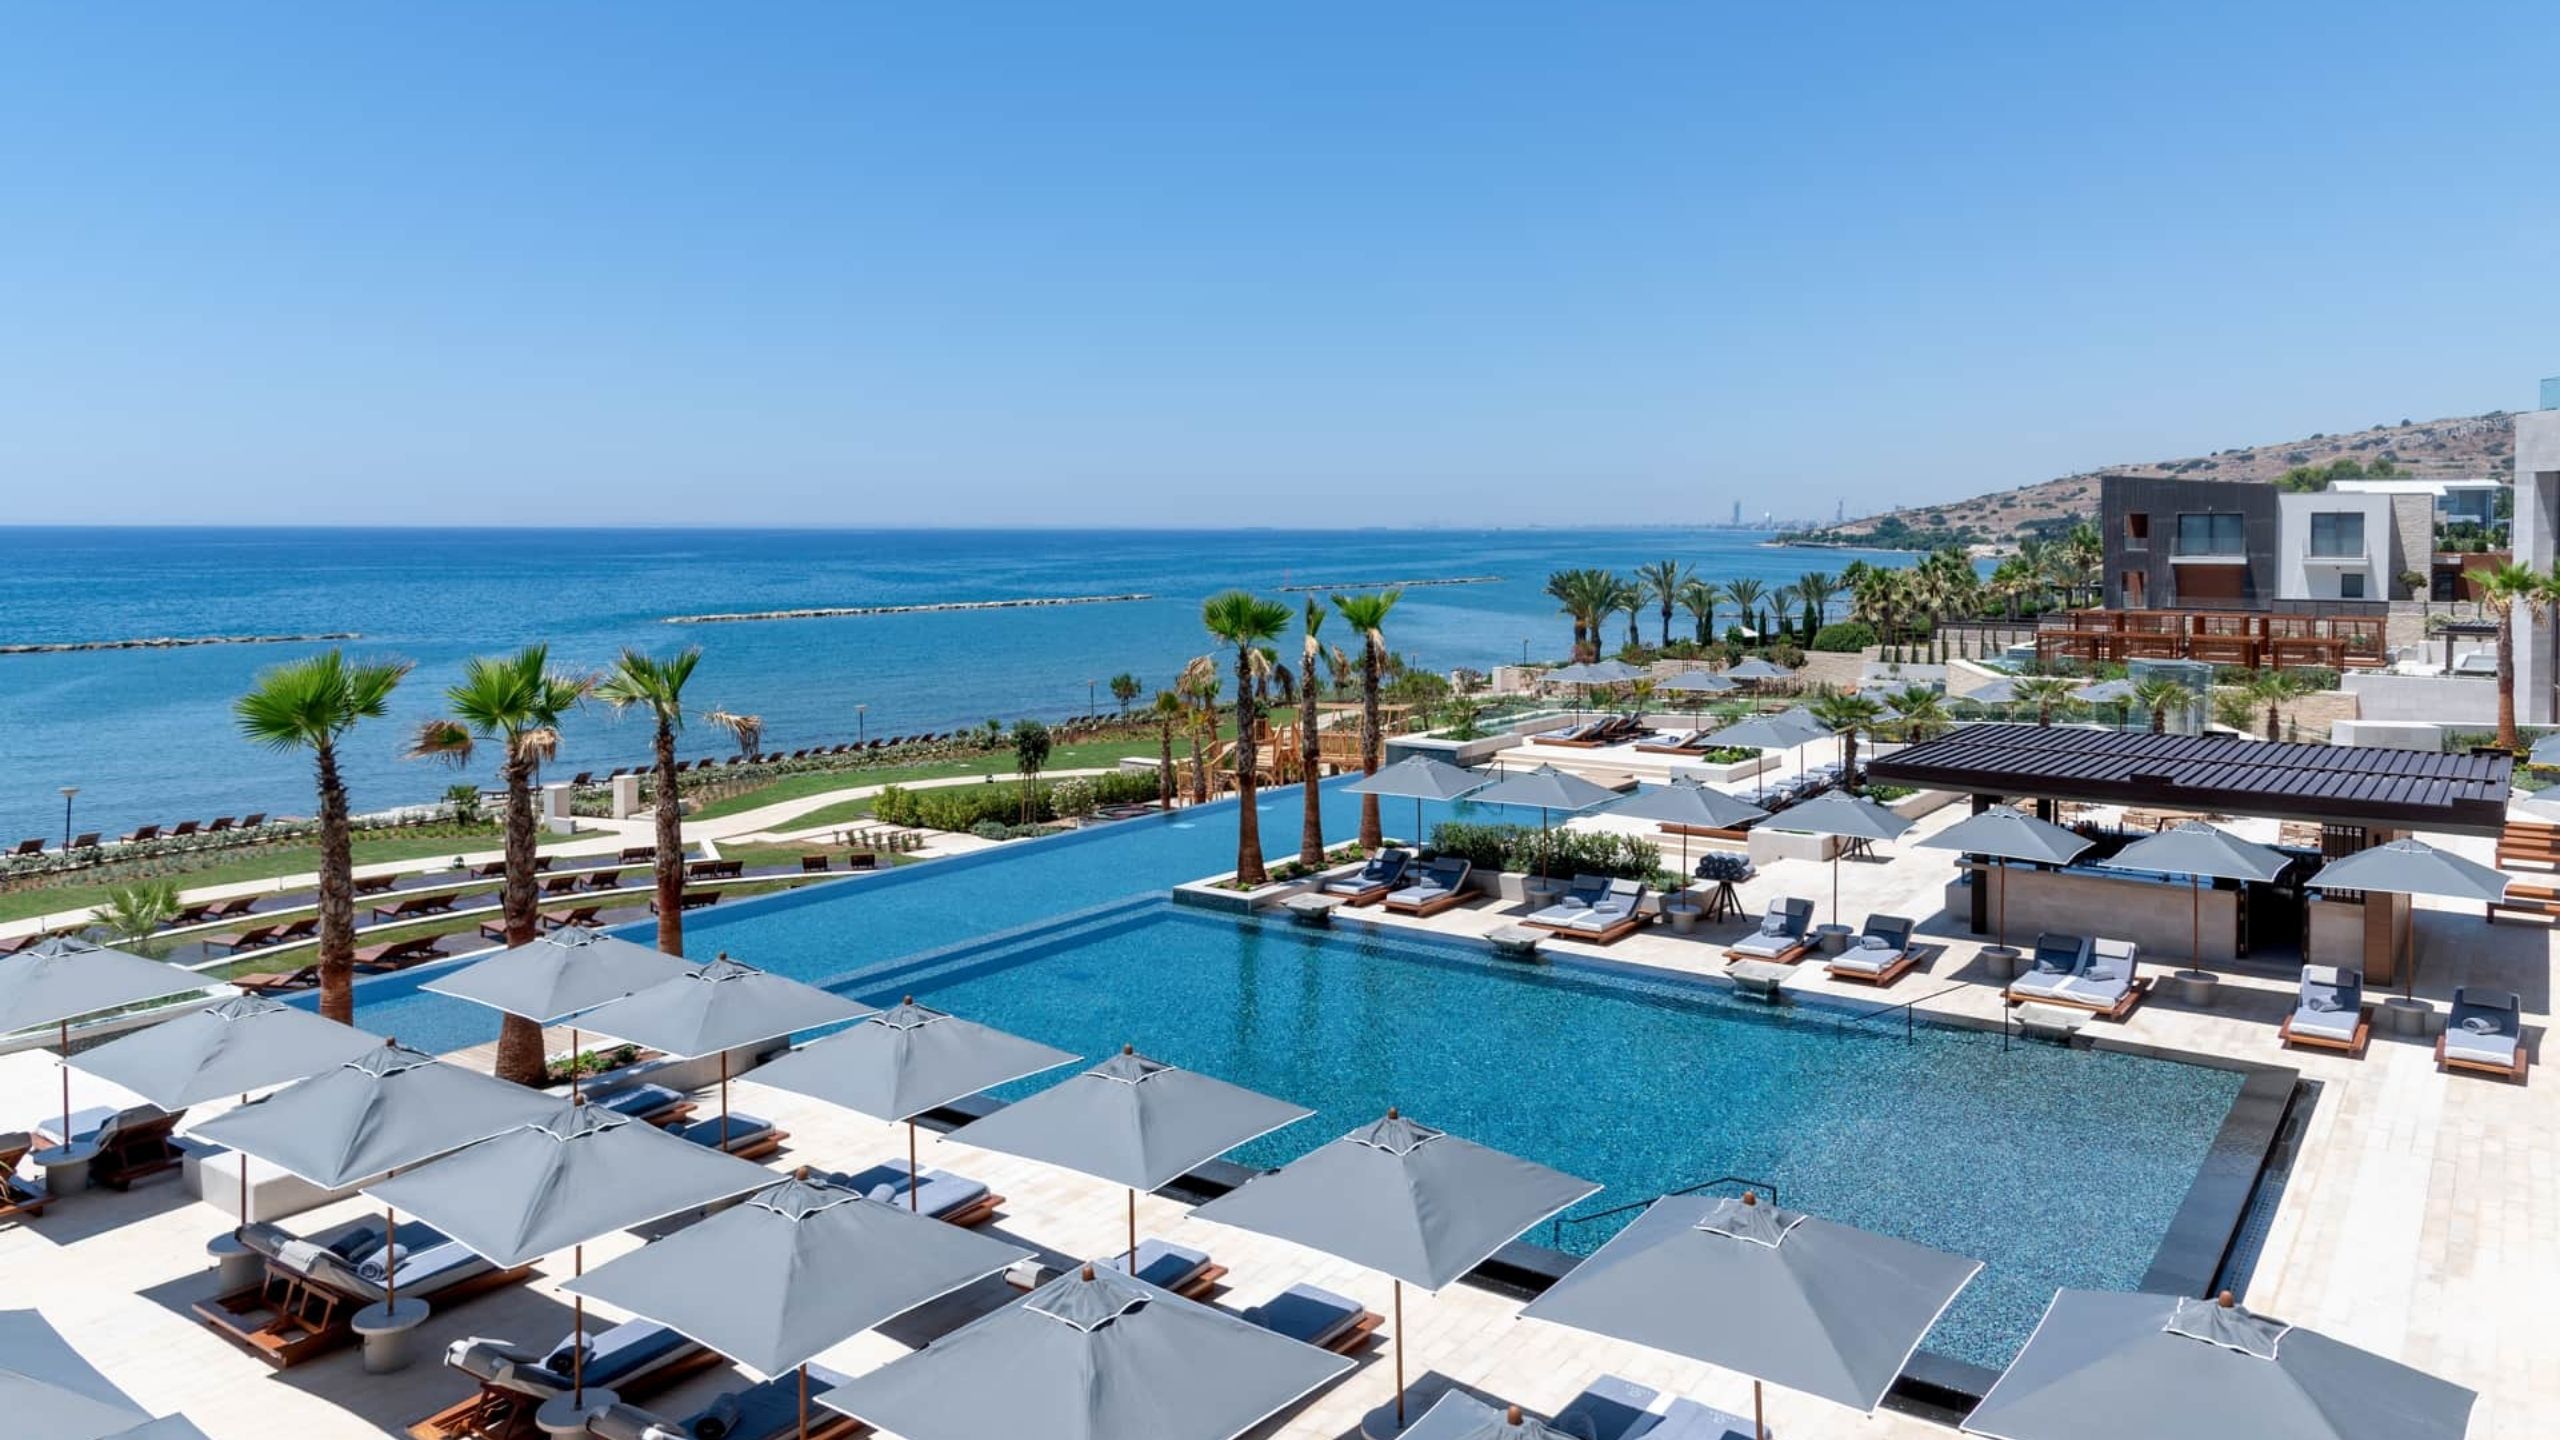 Amara - Sea Your Only View™ in Cyprus